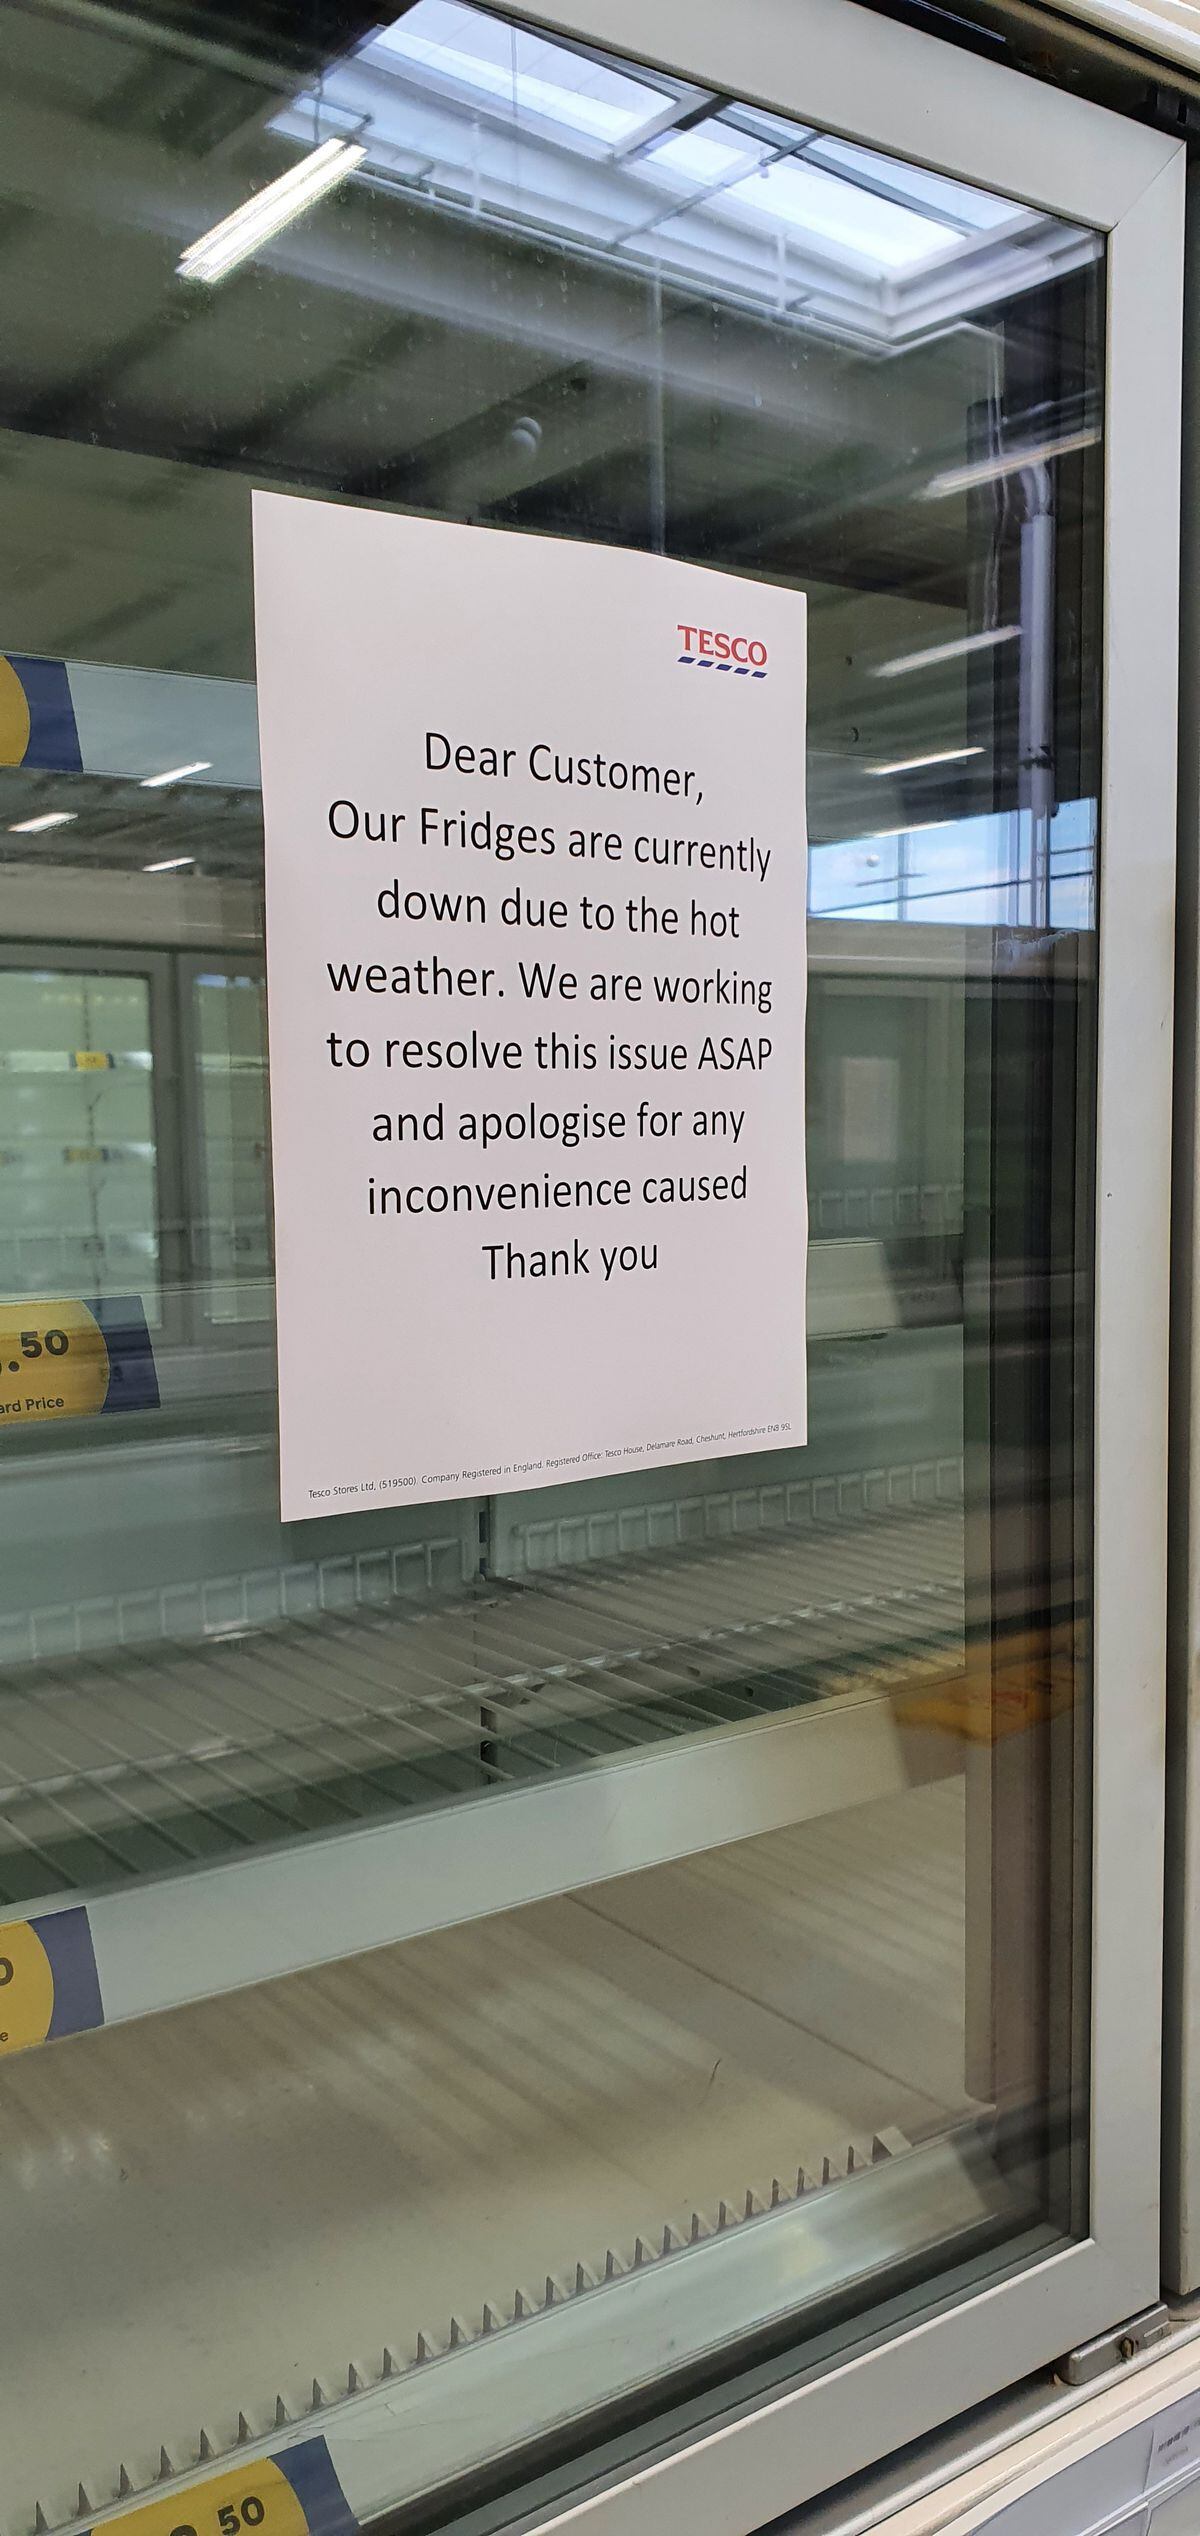 Tesco put up messages to apologise for any issues caused